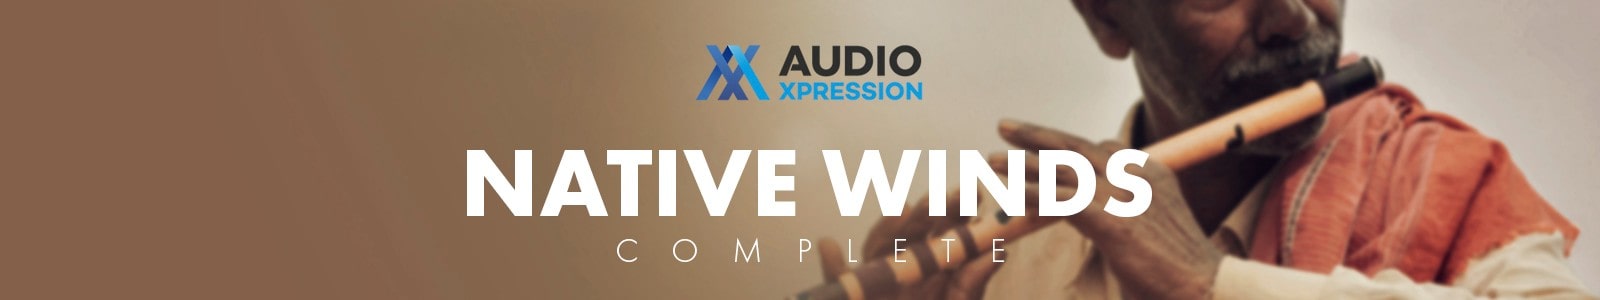 Native Winds Complete by Audio Xpression